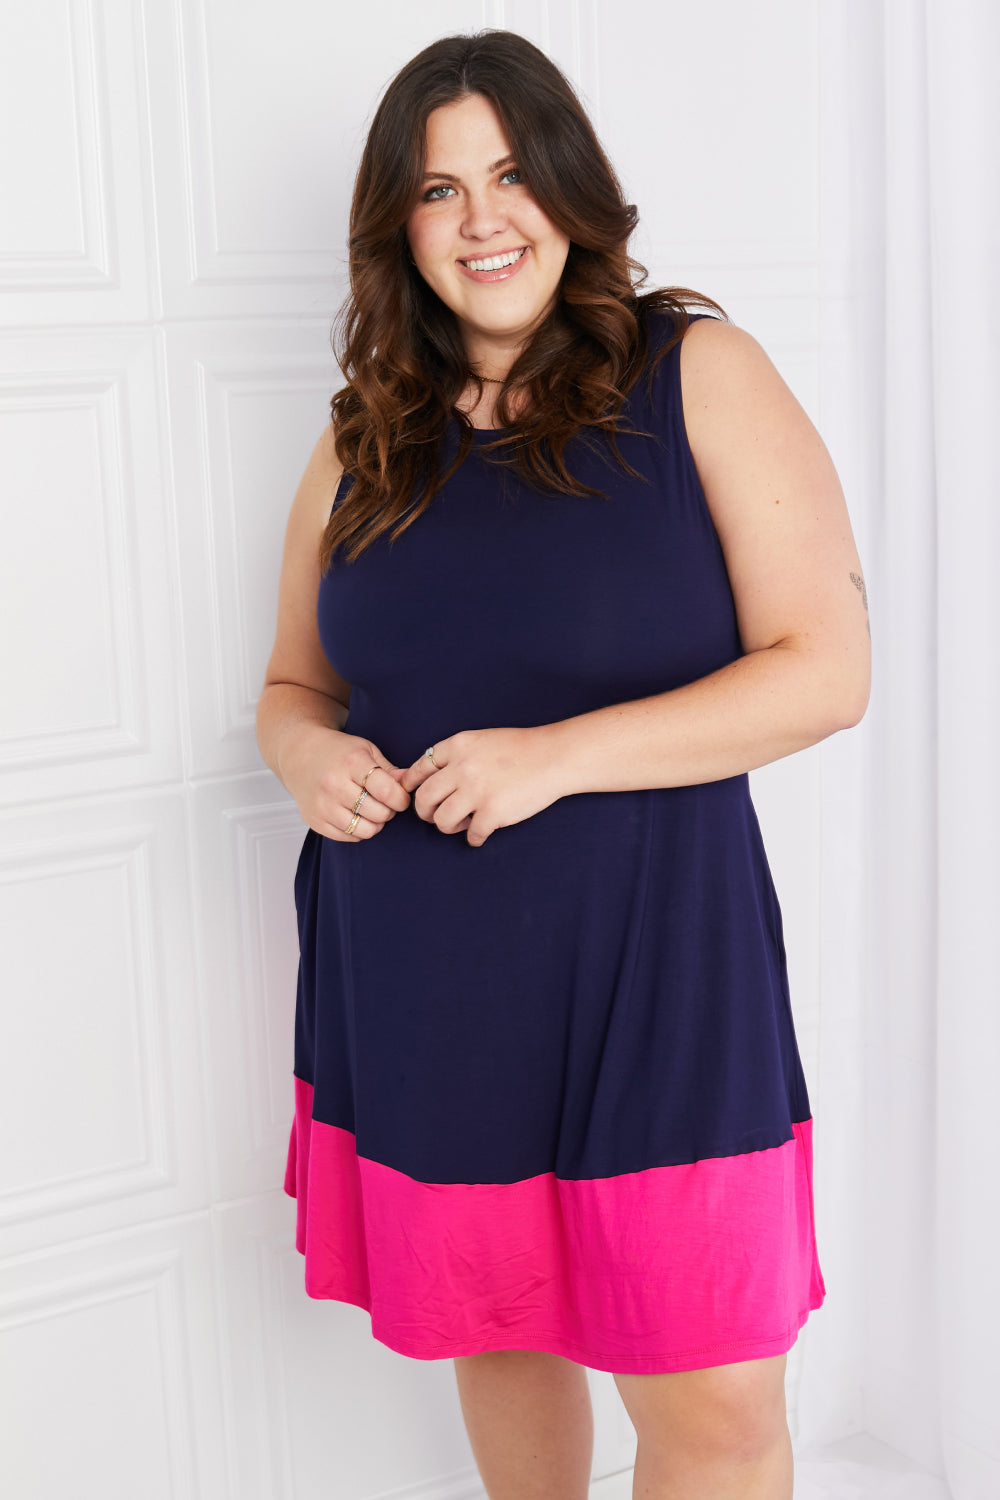 Darling Dipped Sleeveless Dress with Pockets in Navy & Fuchsia